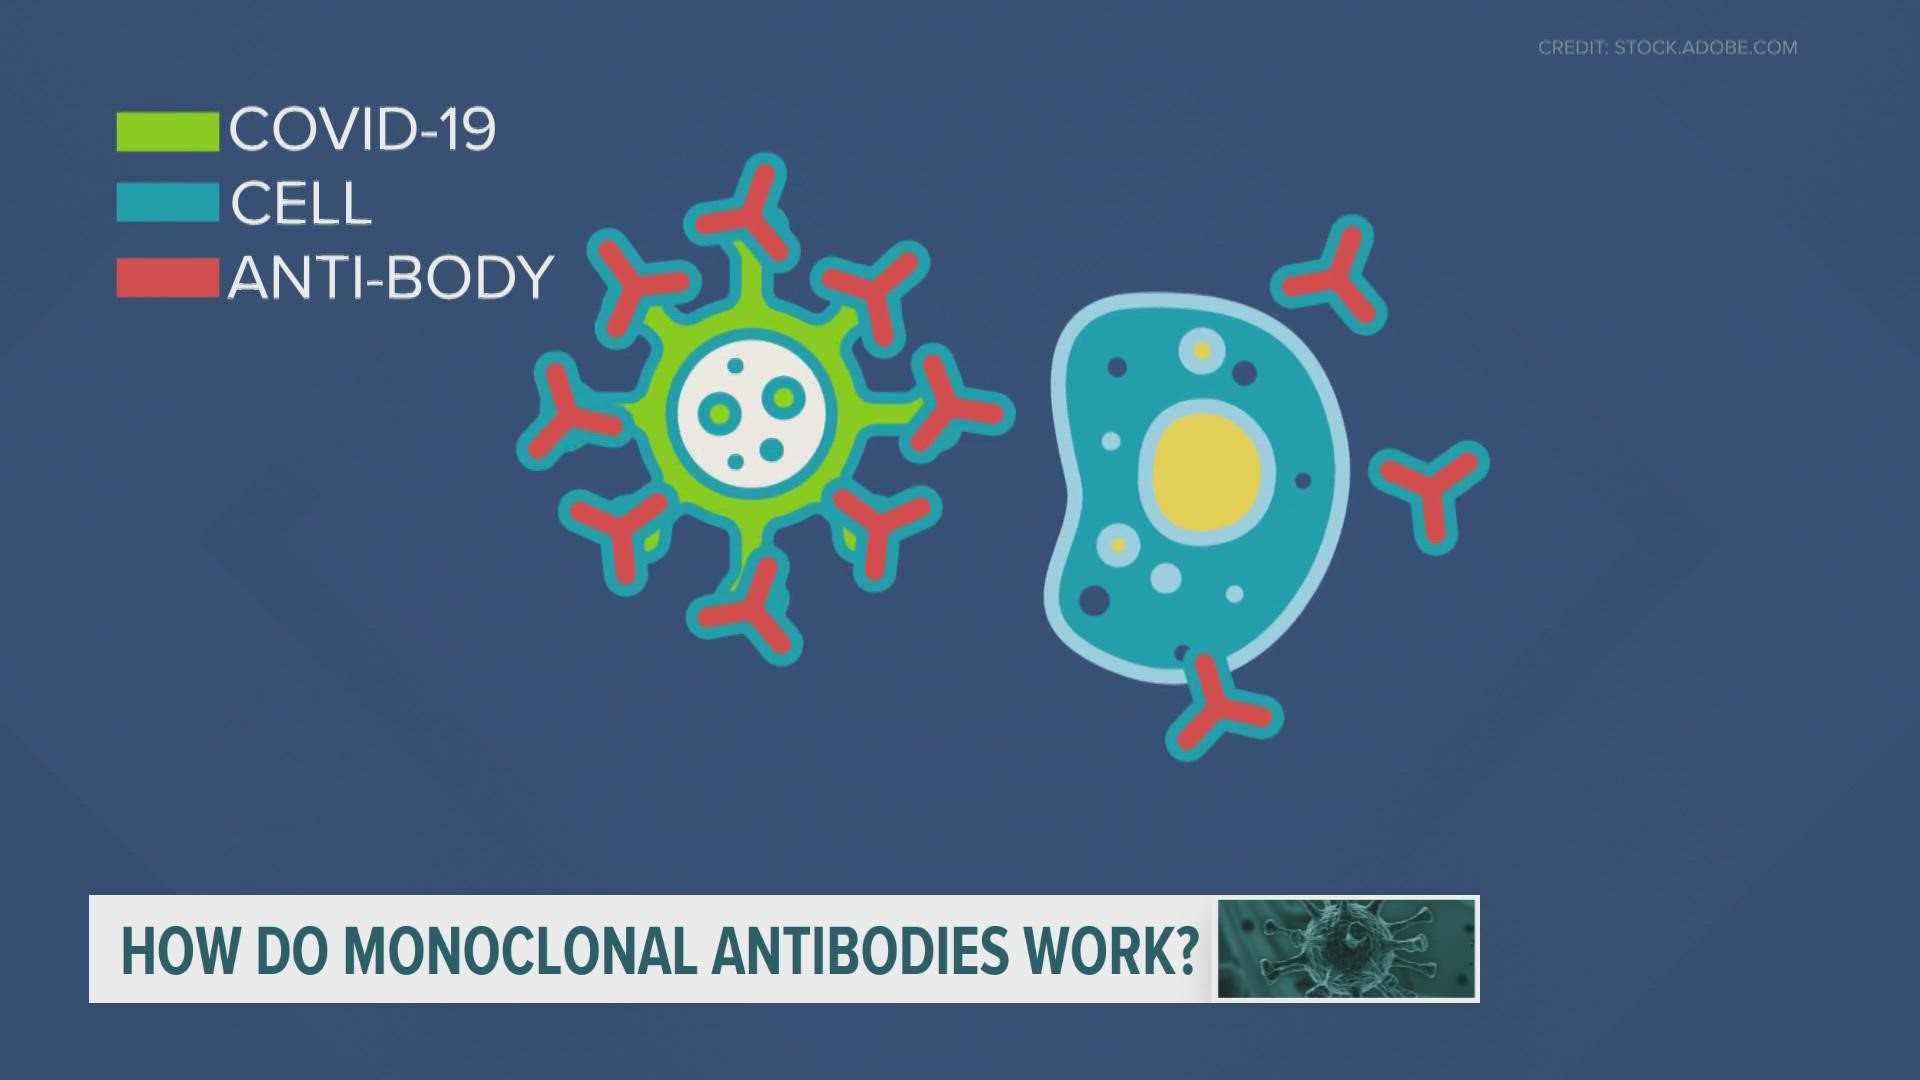 The antibodies work by attaching to the virus and preventing it from infecting other cells, according to experts from the Oregon Health and Science University.